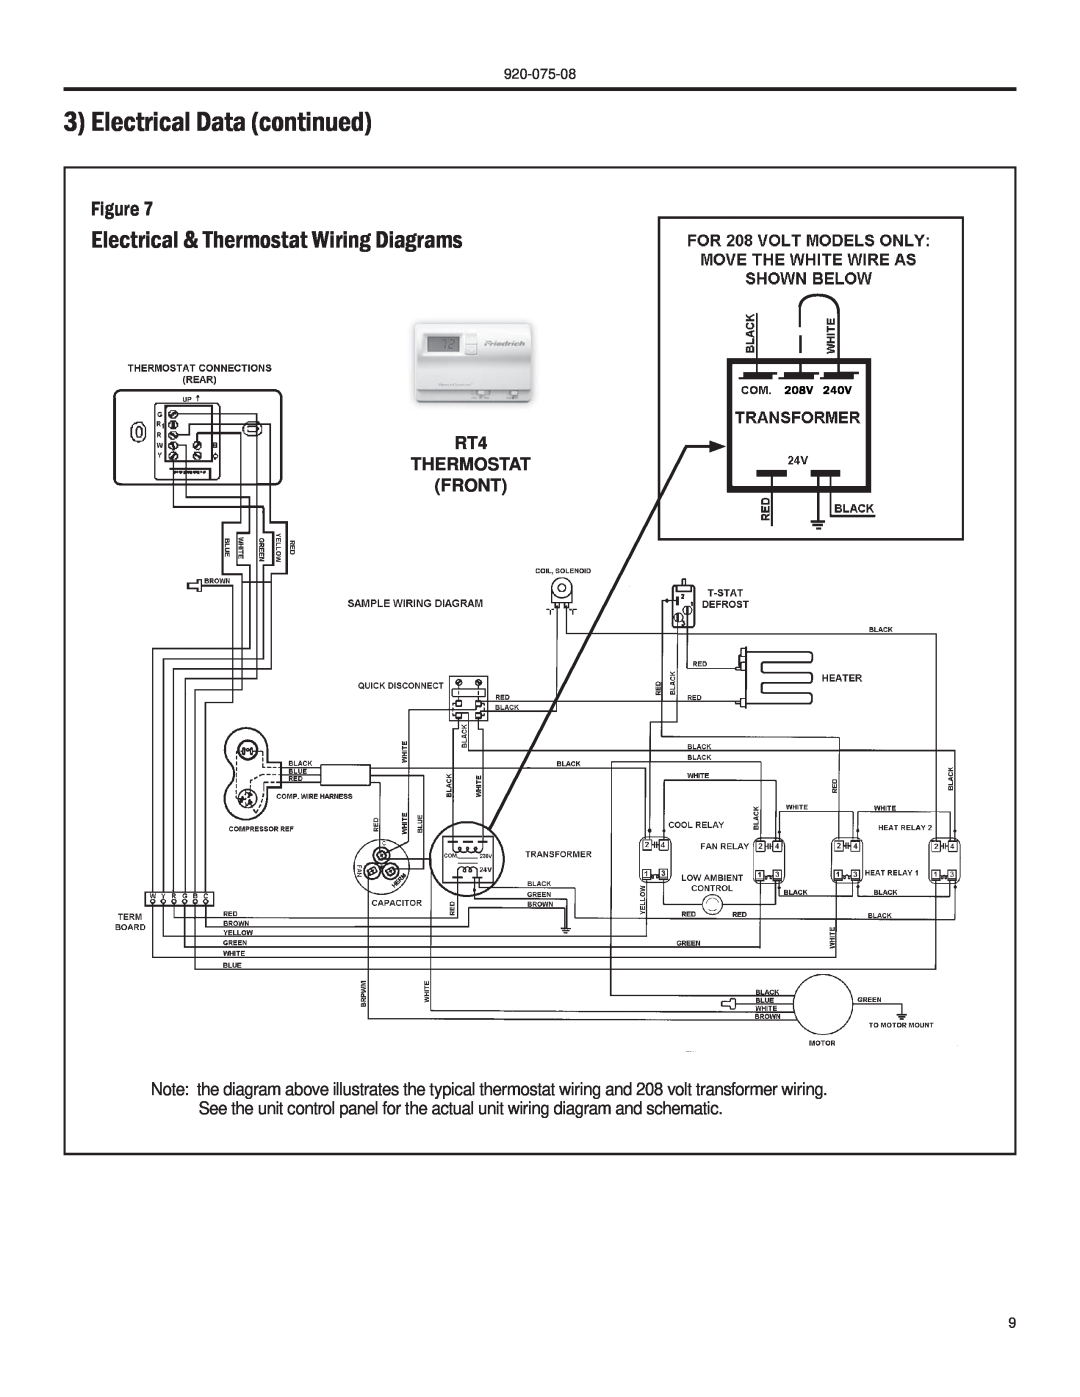 Friedrich A-SERIES manual Electrical & Thermostat Wiring Diagrams, Electrical Data continued, RT4 THERMOSTAT FRONT, 208V 